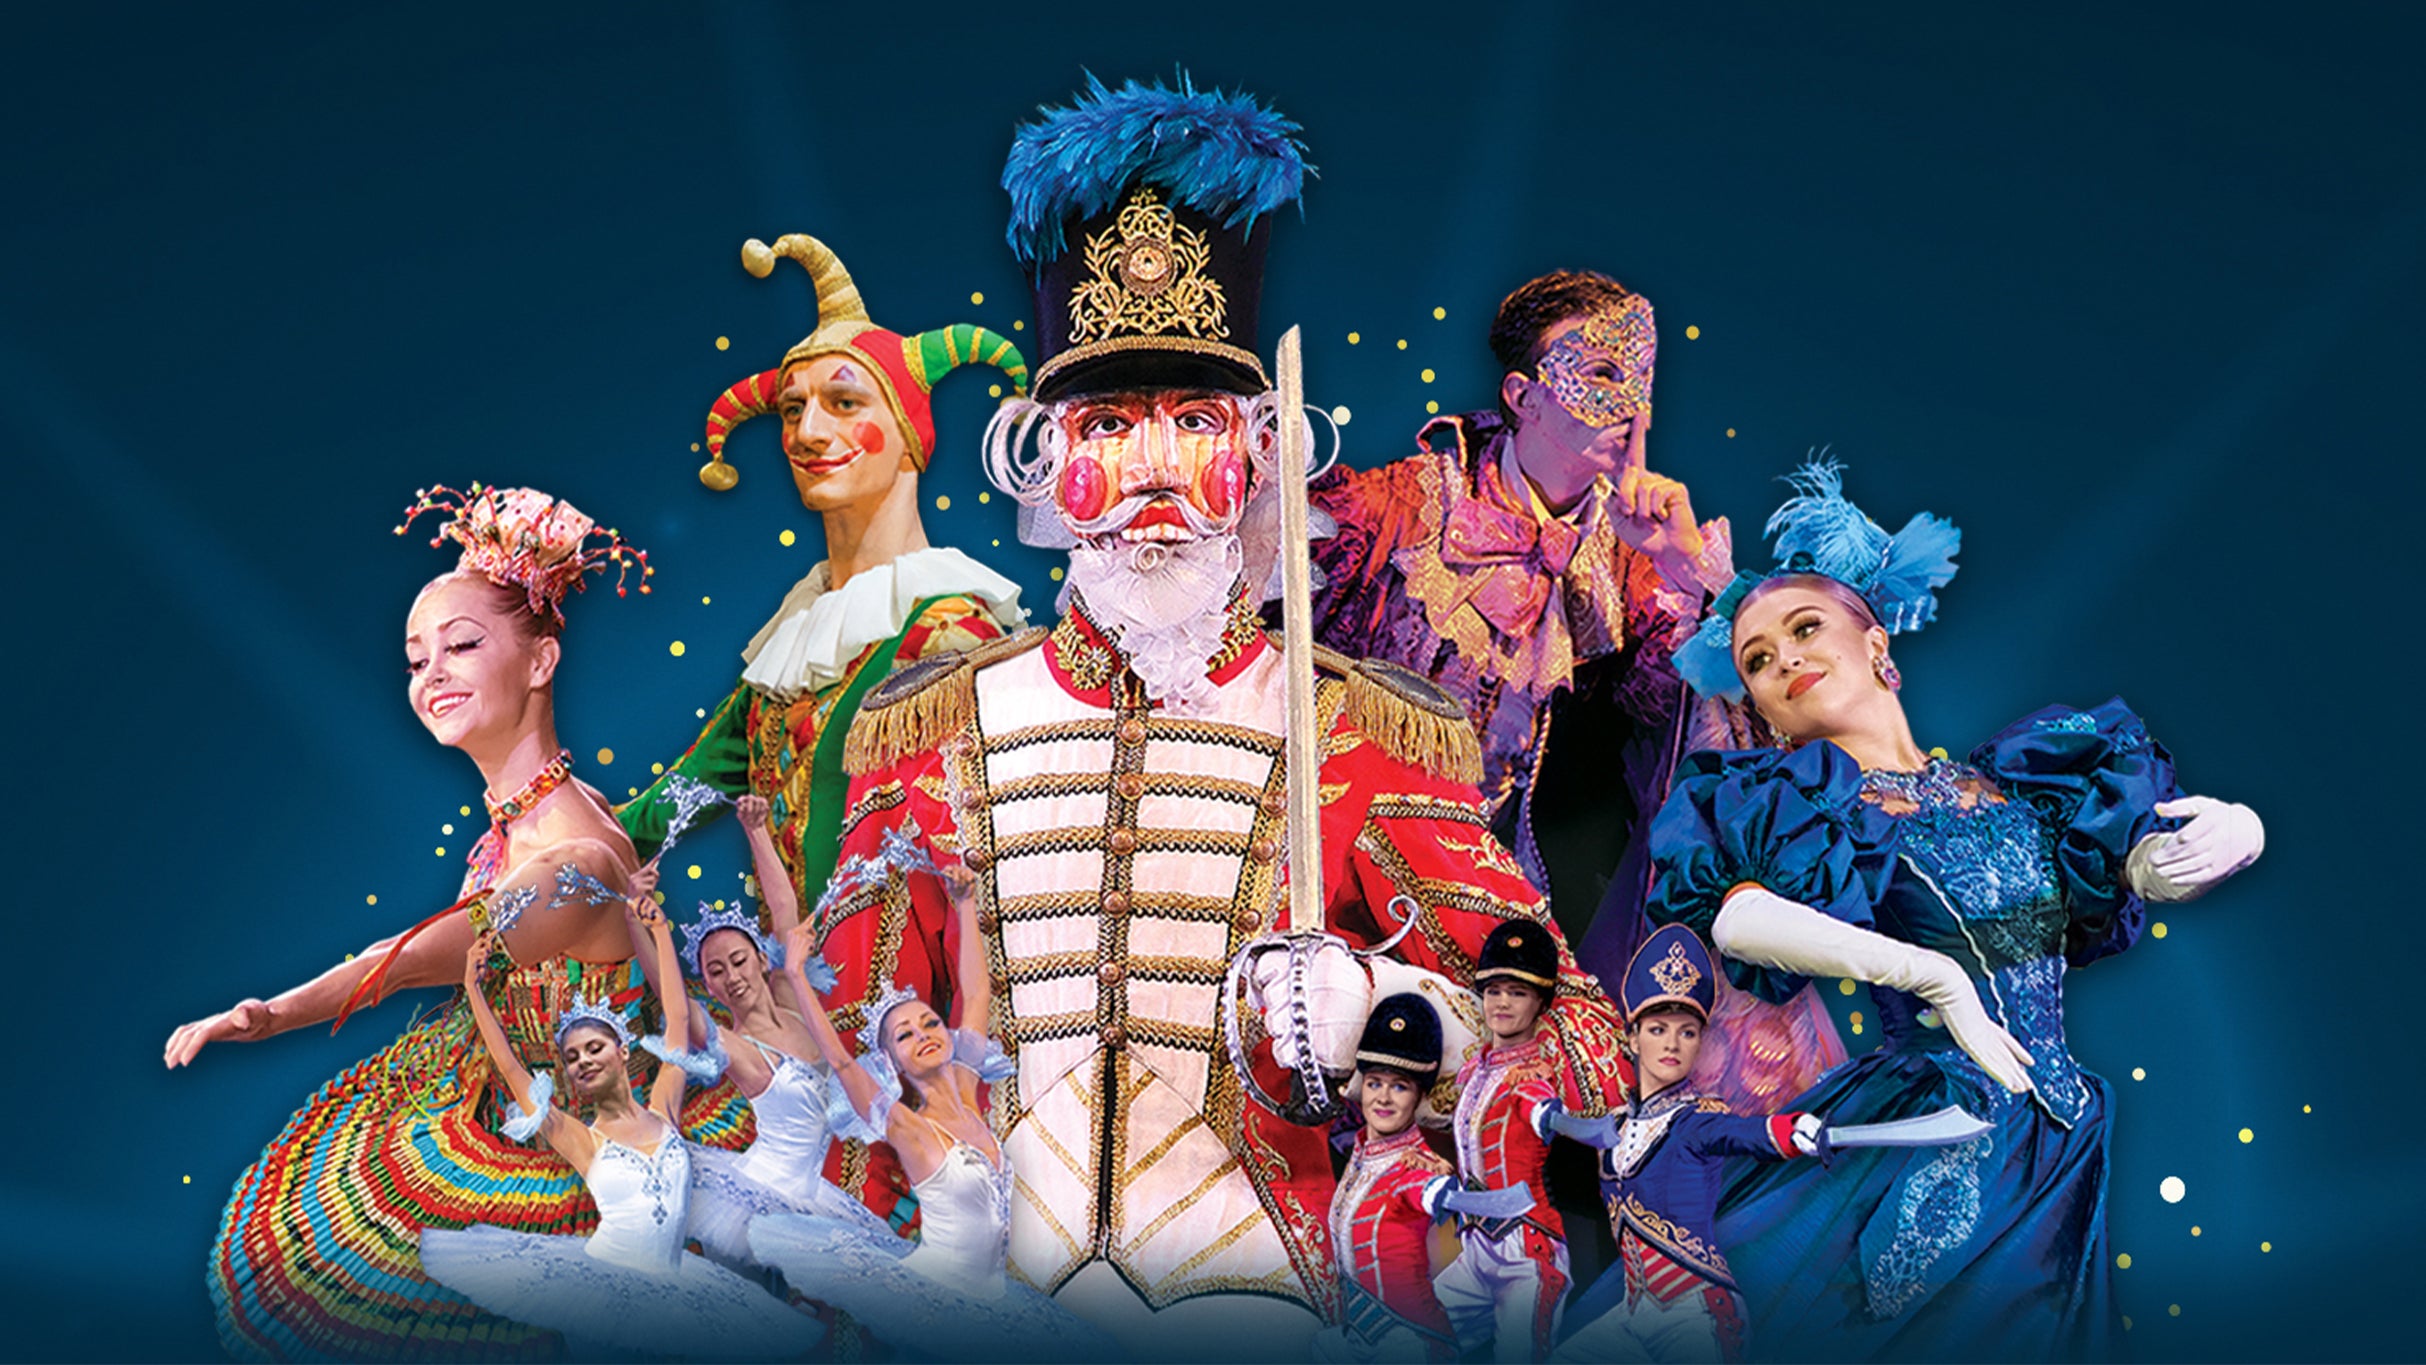 Nutcracker!  Magical Christmas Ballet! presale password for show tickets in Chattanooga, TN (Soldiers and Sailors Memorial Auditorium)